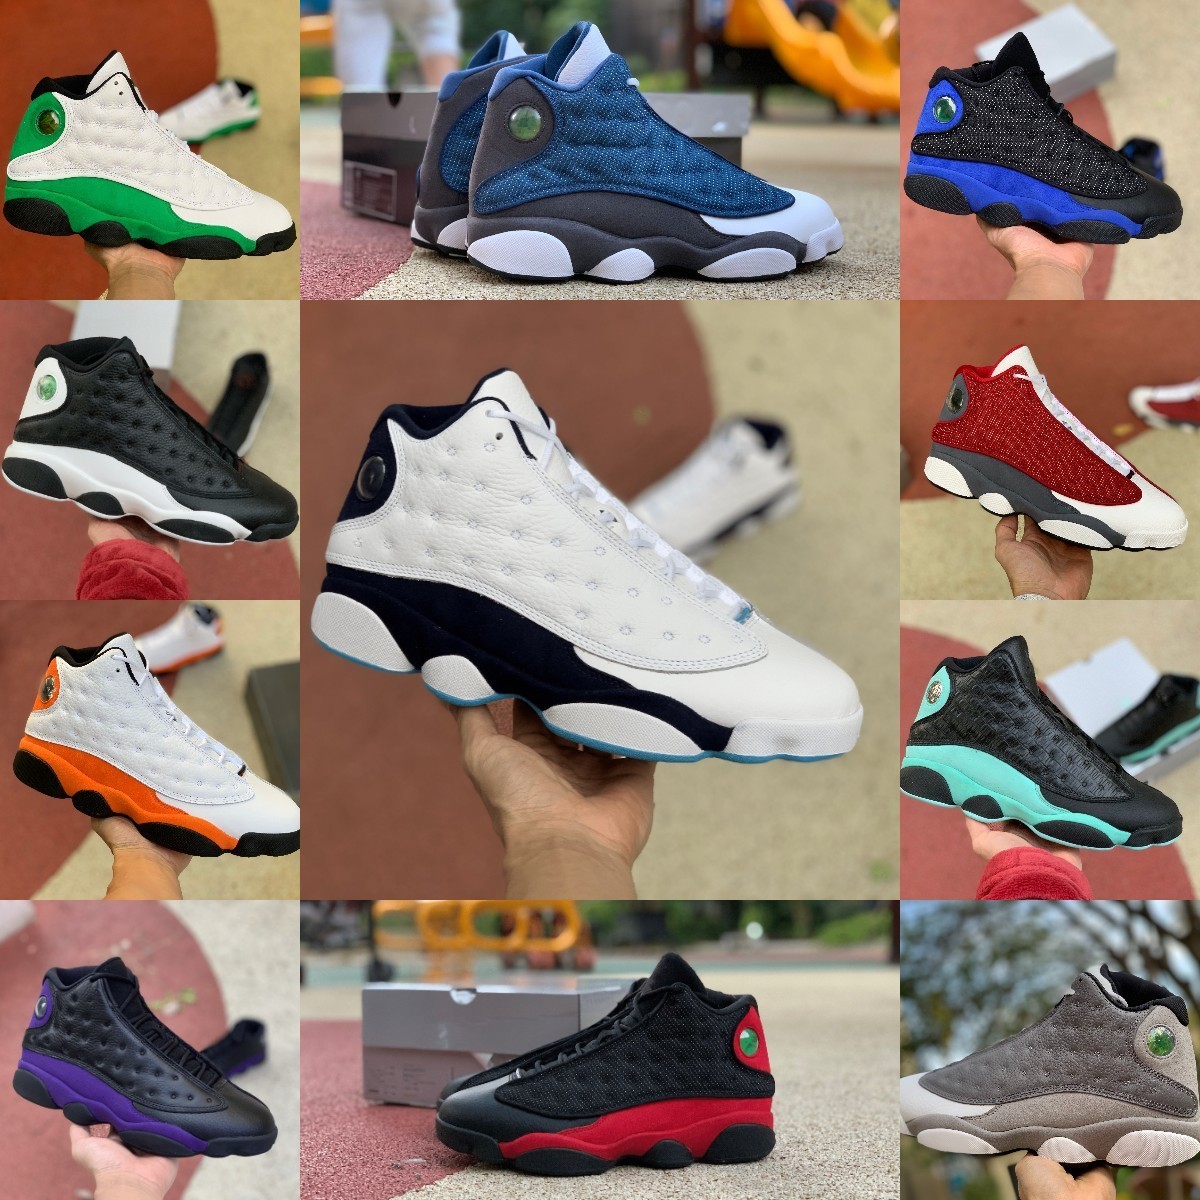 

Jumpman 13 13S Basketball Shoes Mens High Flint Bred Island Green Red Dirty Hyper Royal Starfish He Got Game Black Cat Court Purple Grey Toe Chicago Trainer Sneakers, Please contact us